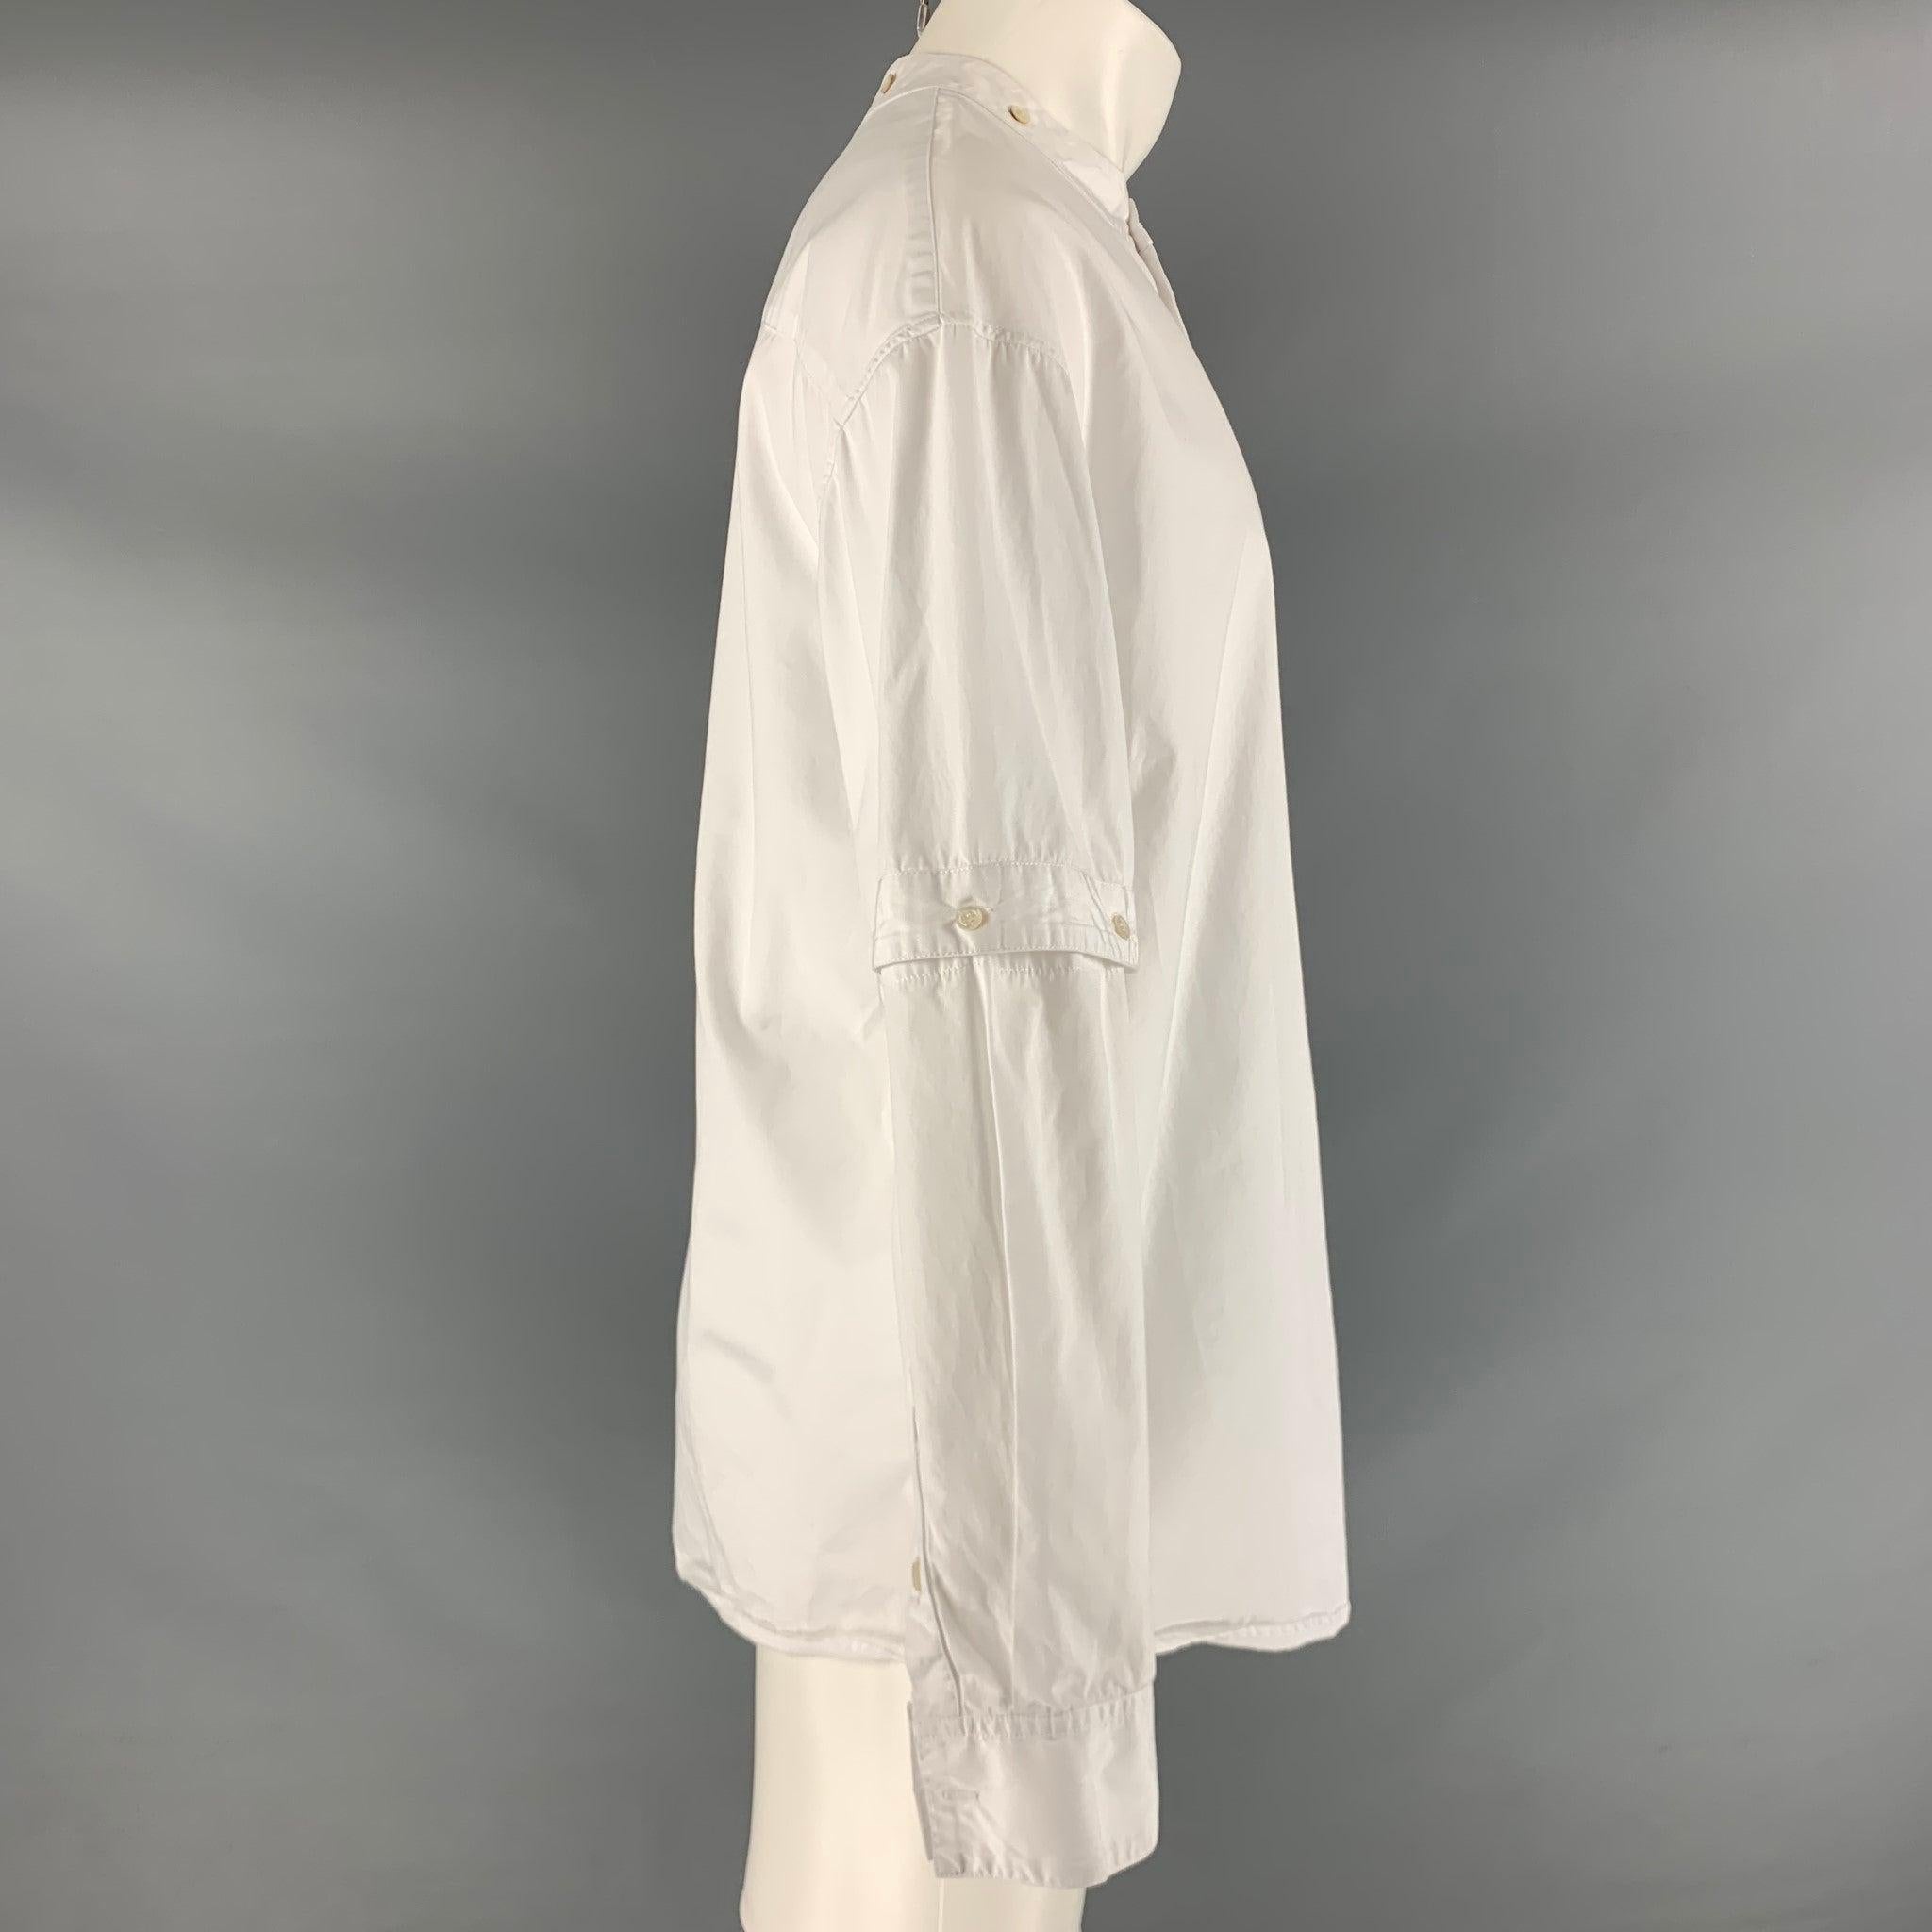 HUSSEIN CHALAYAN long sleeve oversized shirt comes in a white cotton featuring a button up style, nehru color, and adjustable sleeves.Excellent Pre-Owned Condition. 

Marked:   48
 

Measurements: 
 
Shoulder: 23 inches Chest: 46 inches Sleeve: 22.5